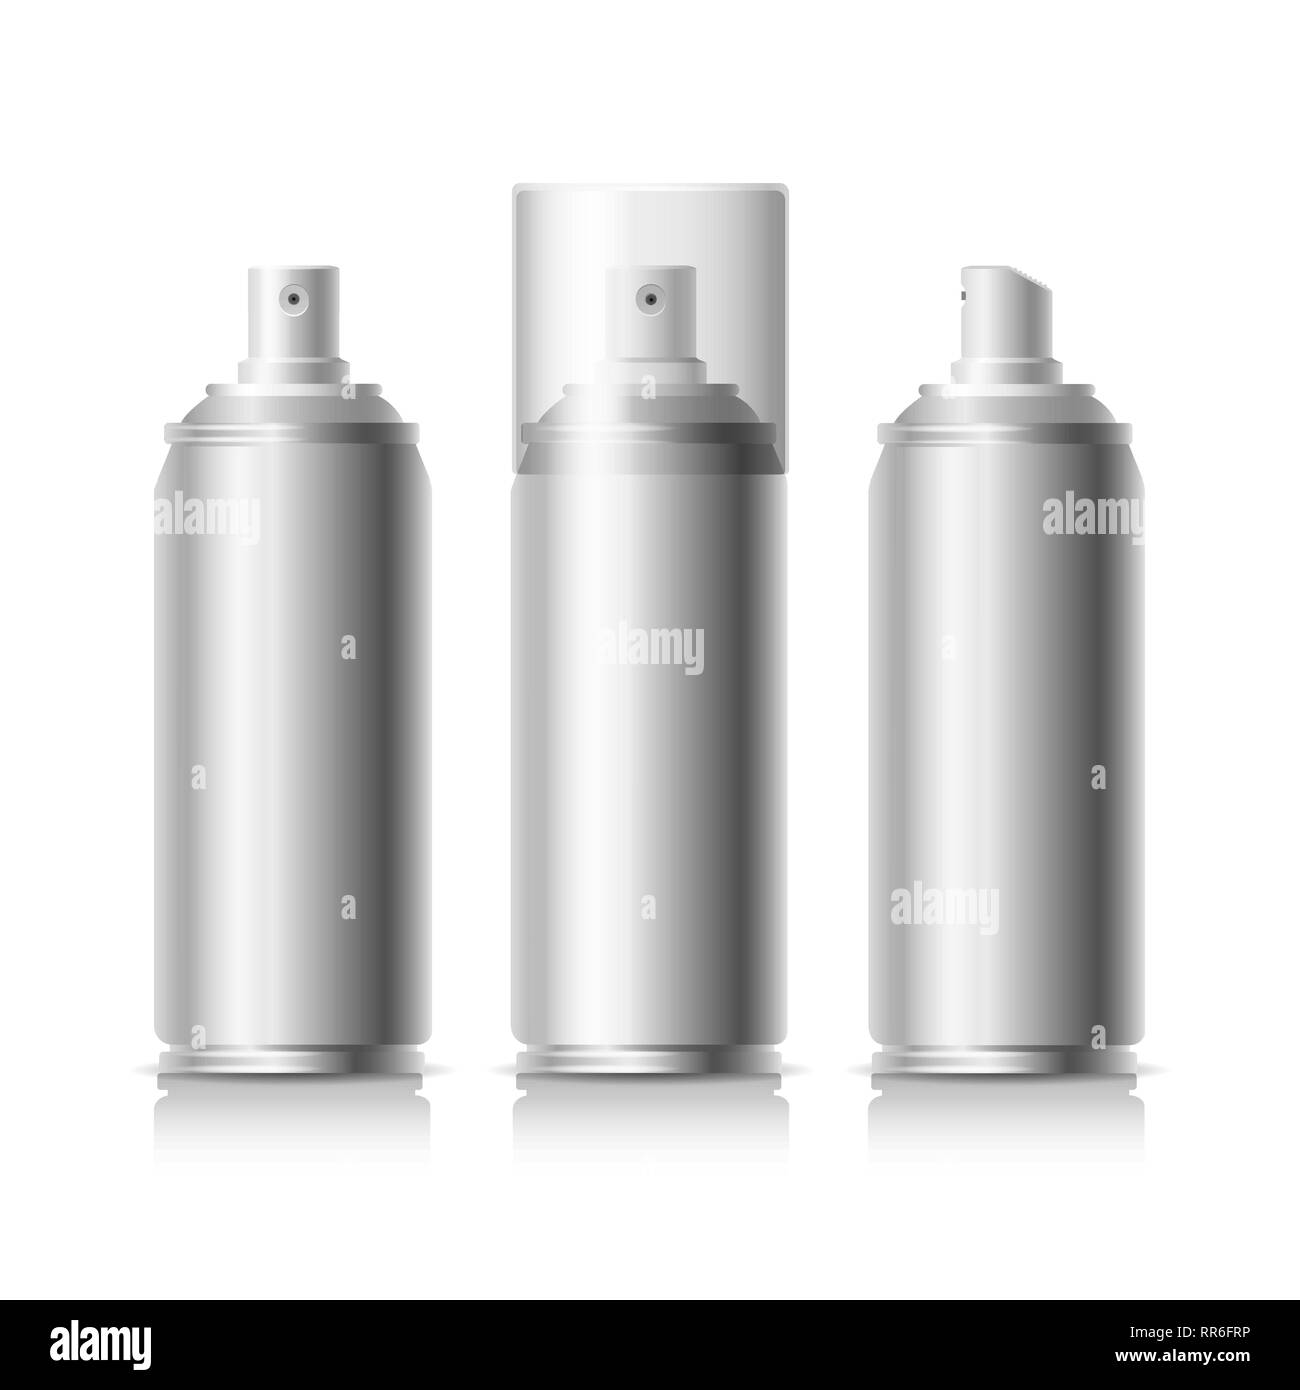 Download Hairspray Can Metal Aerosol Bottle Vector Illustration Metallic Spray Can Air Tube Deodorant Mockup Isolated On White Background Stock Vector Image Art Alamy